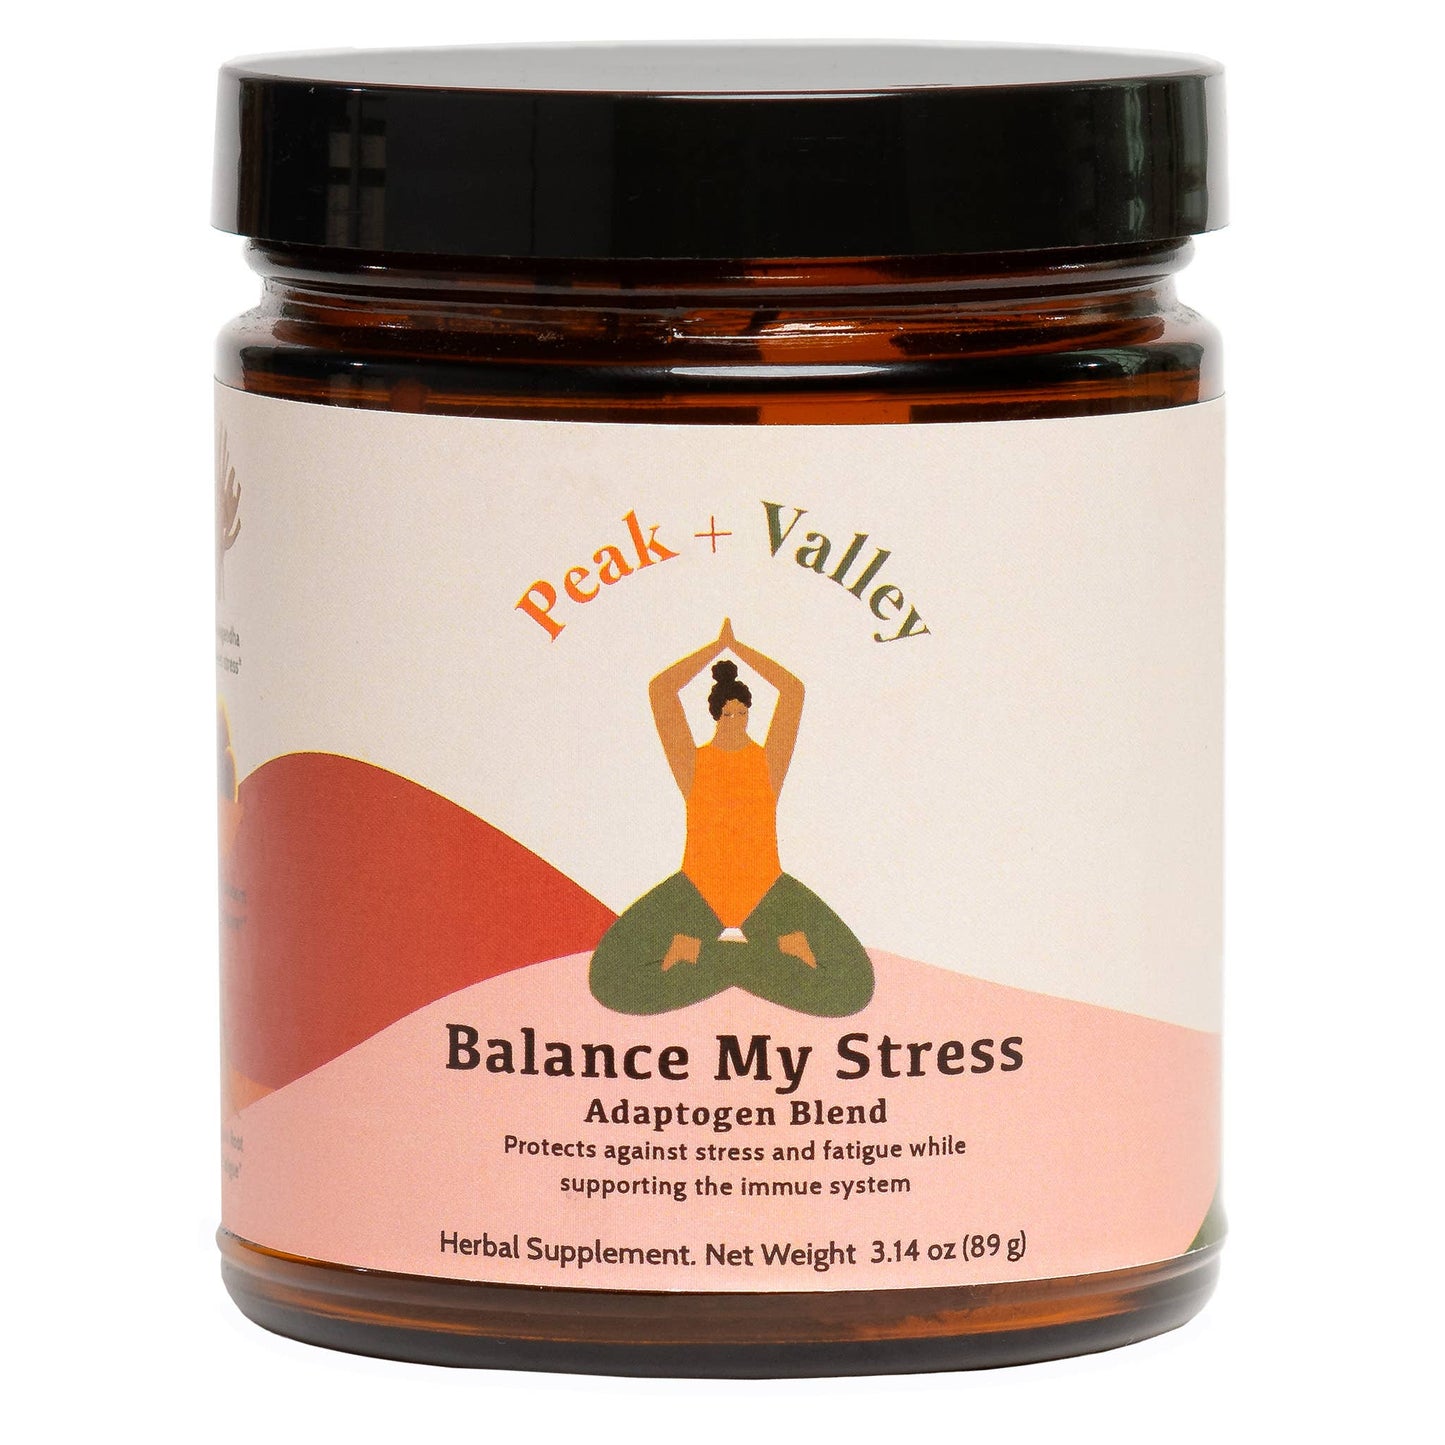 Balance My Stress Adaptogen Blend Supplements by Peak and Valley